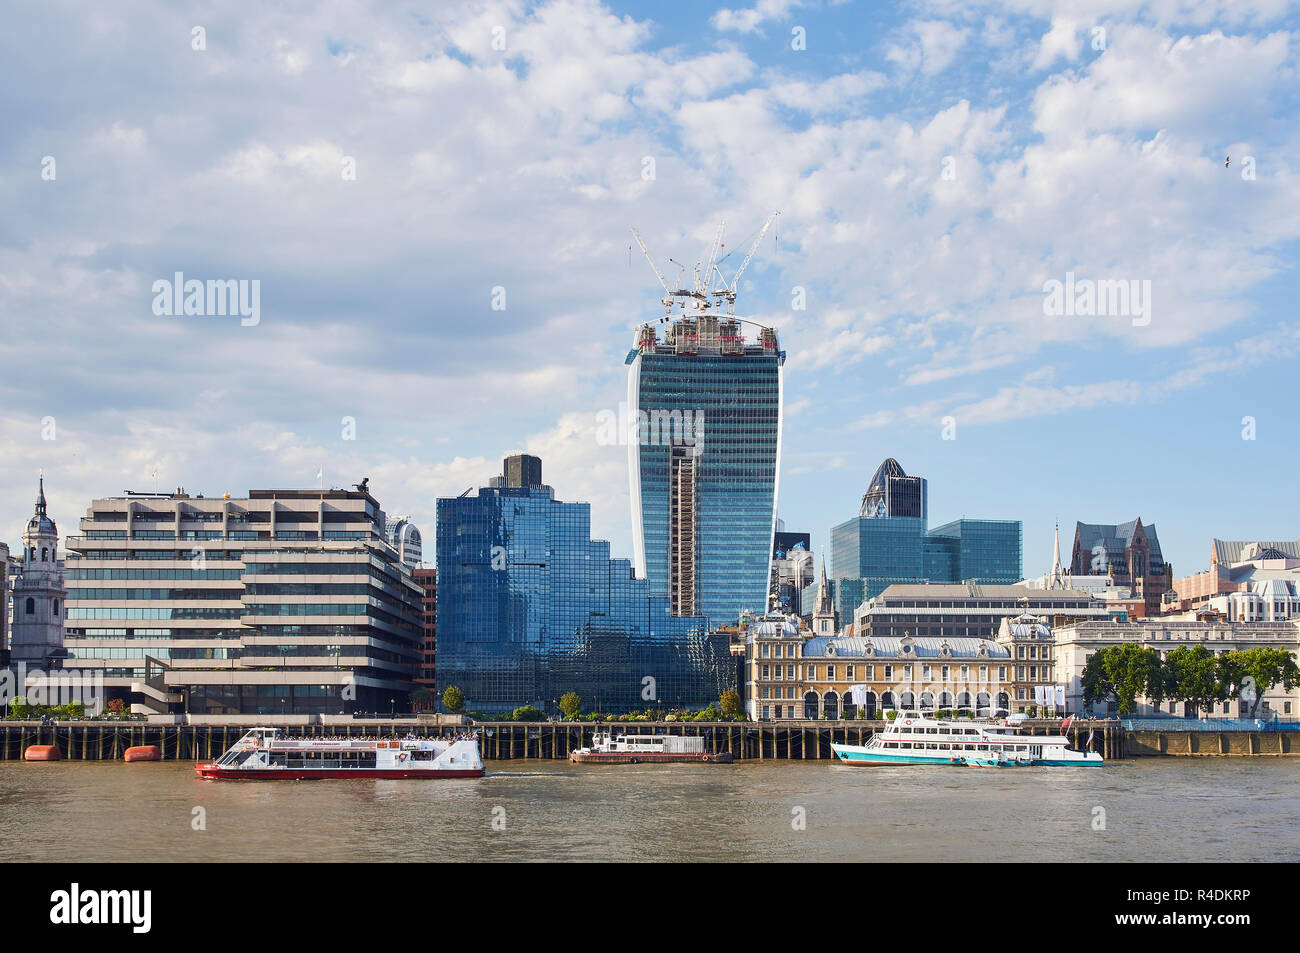 City of London from the South Bank, with the Walkie Talkie Tower under construction and river boats Stock Photo